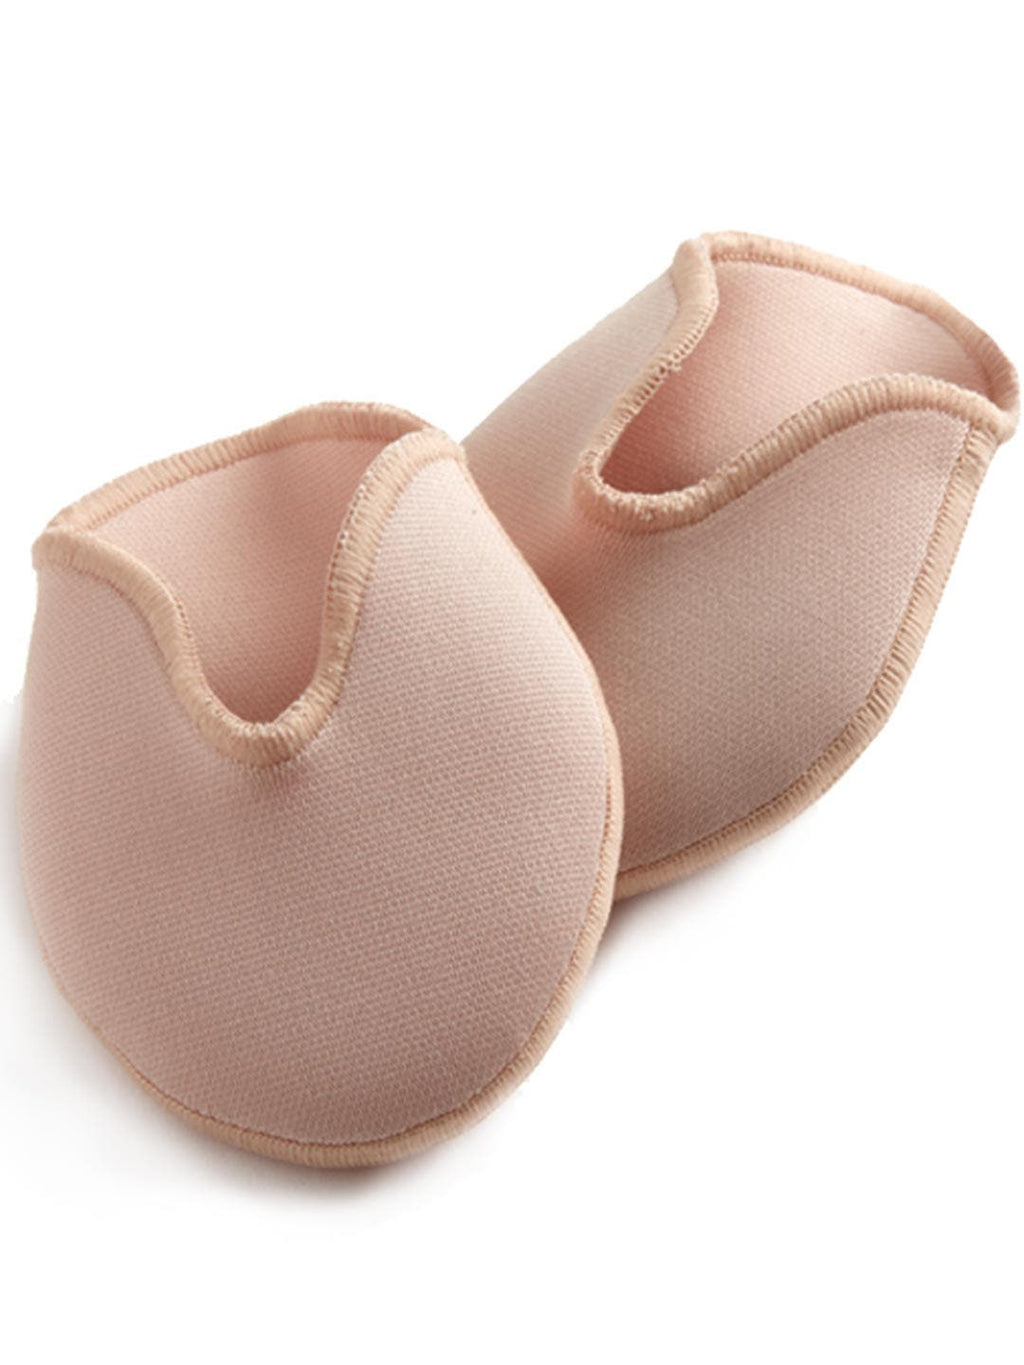 Bunheads Ouch Pouch for Pointe Shoes